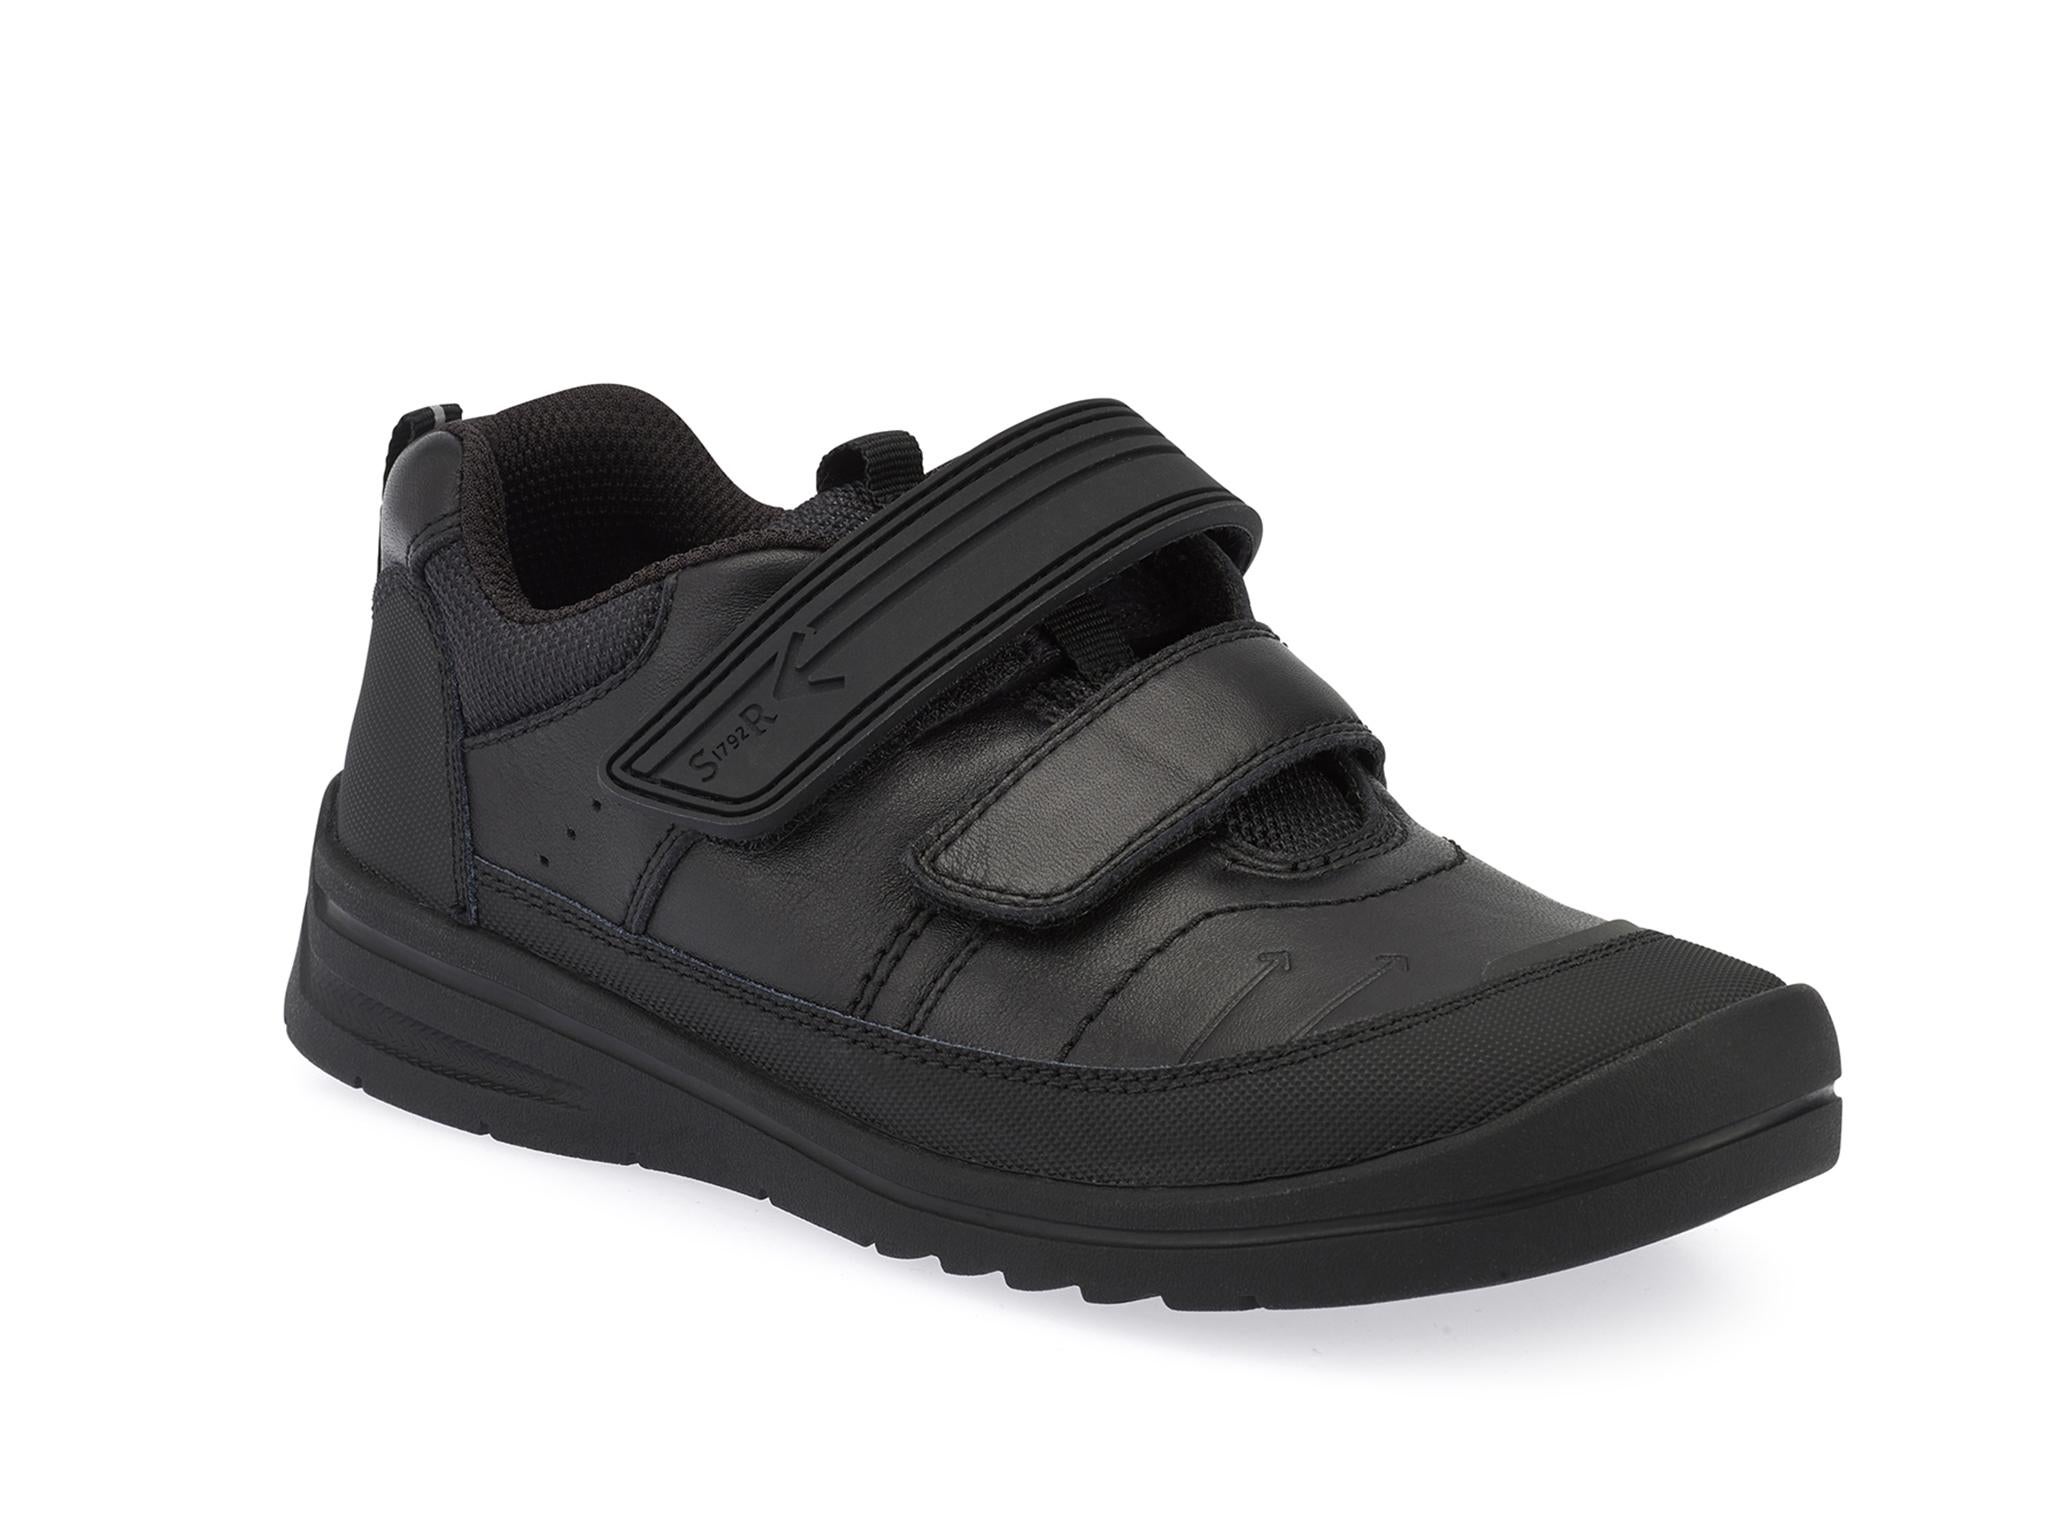 cool black shoes for school